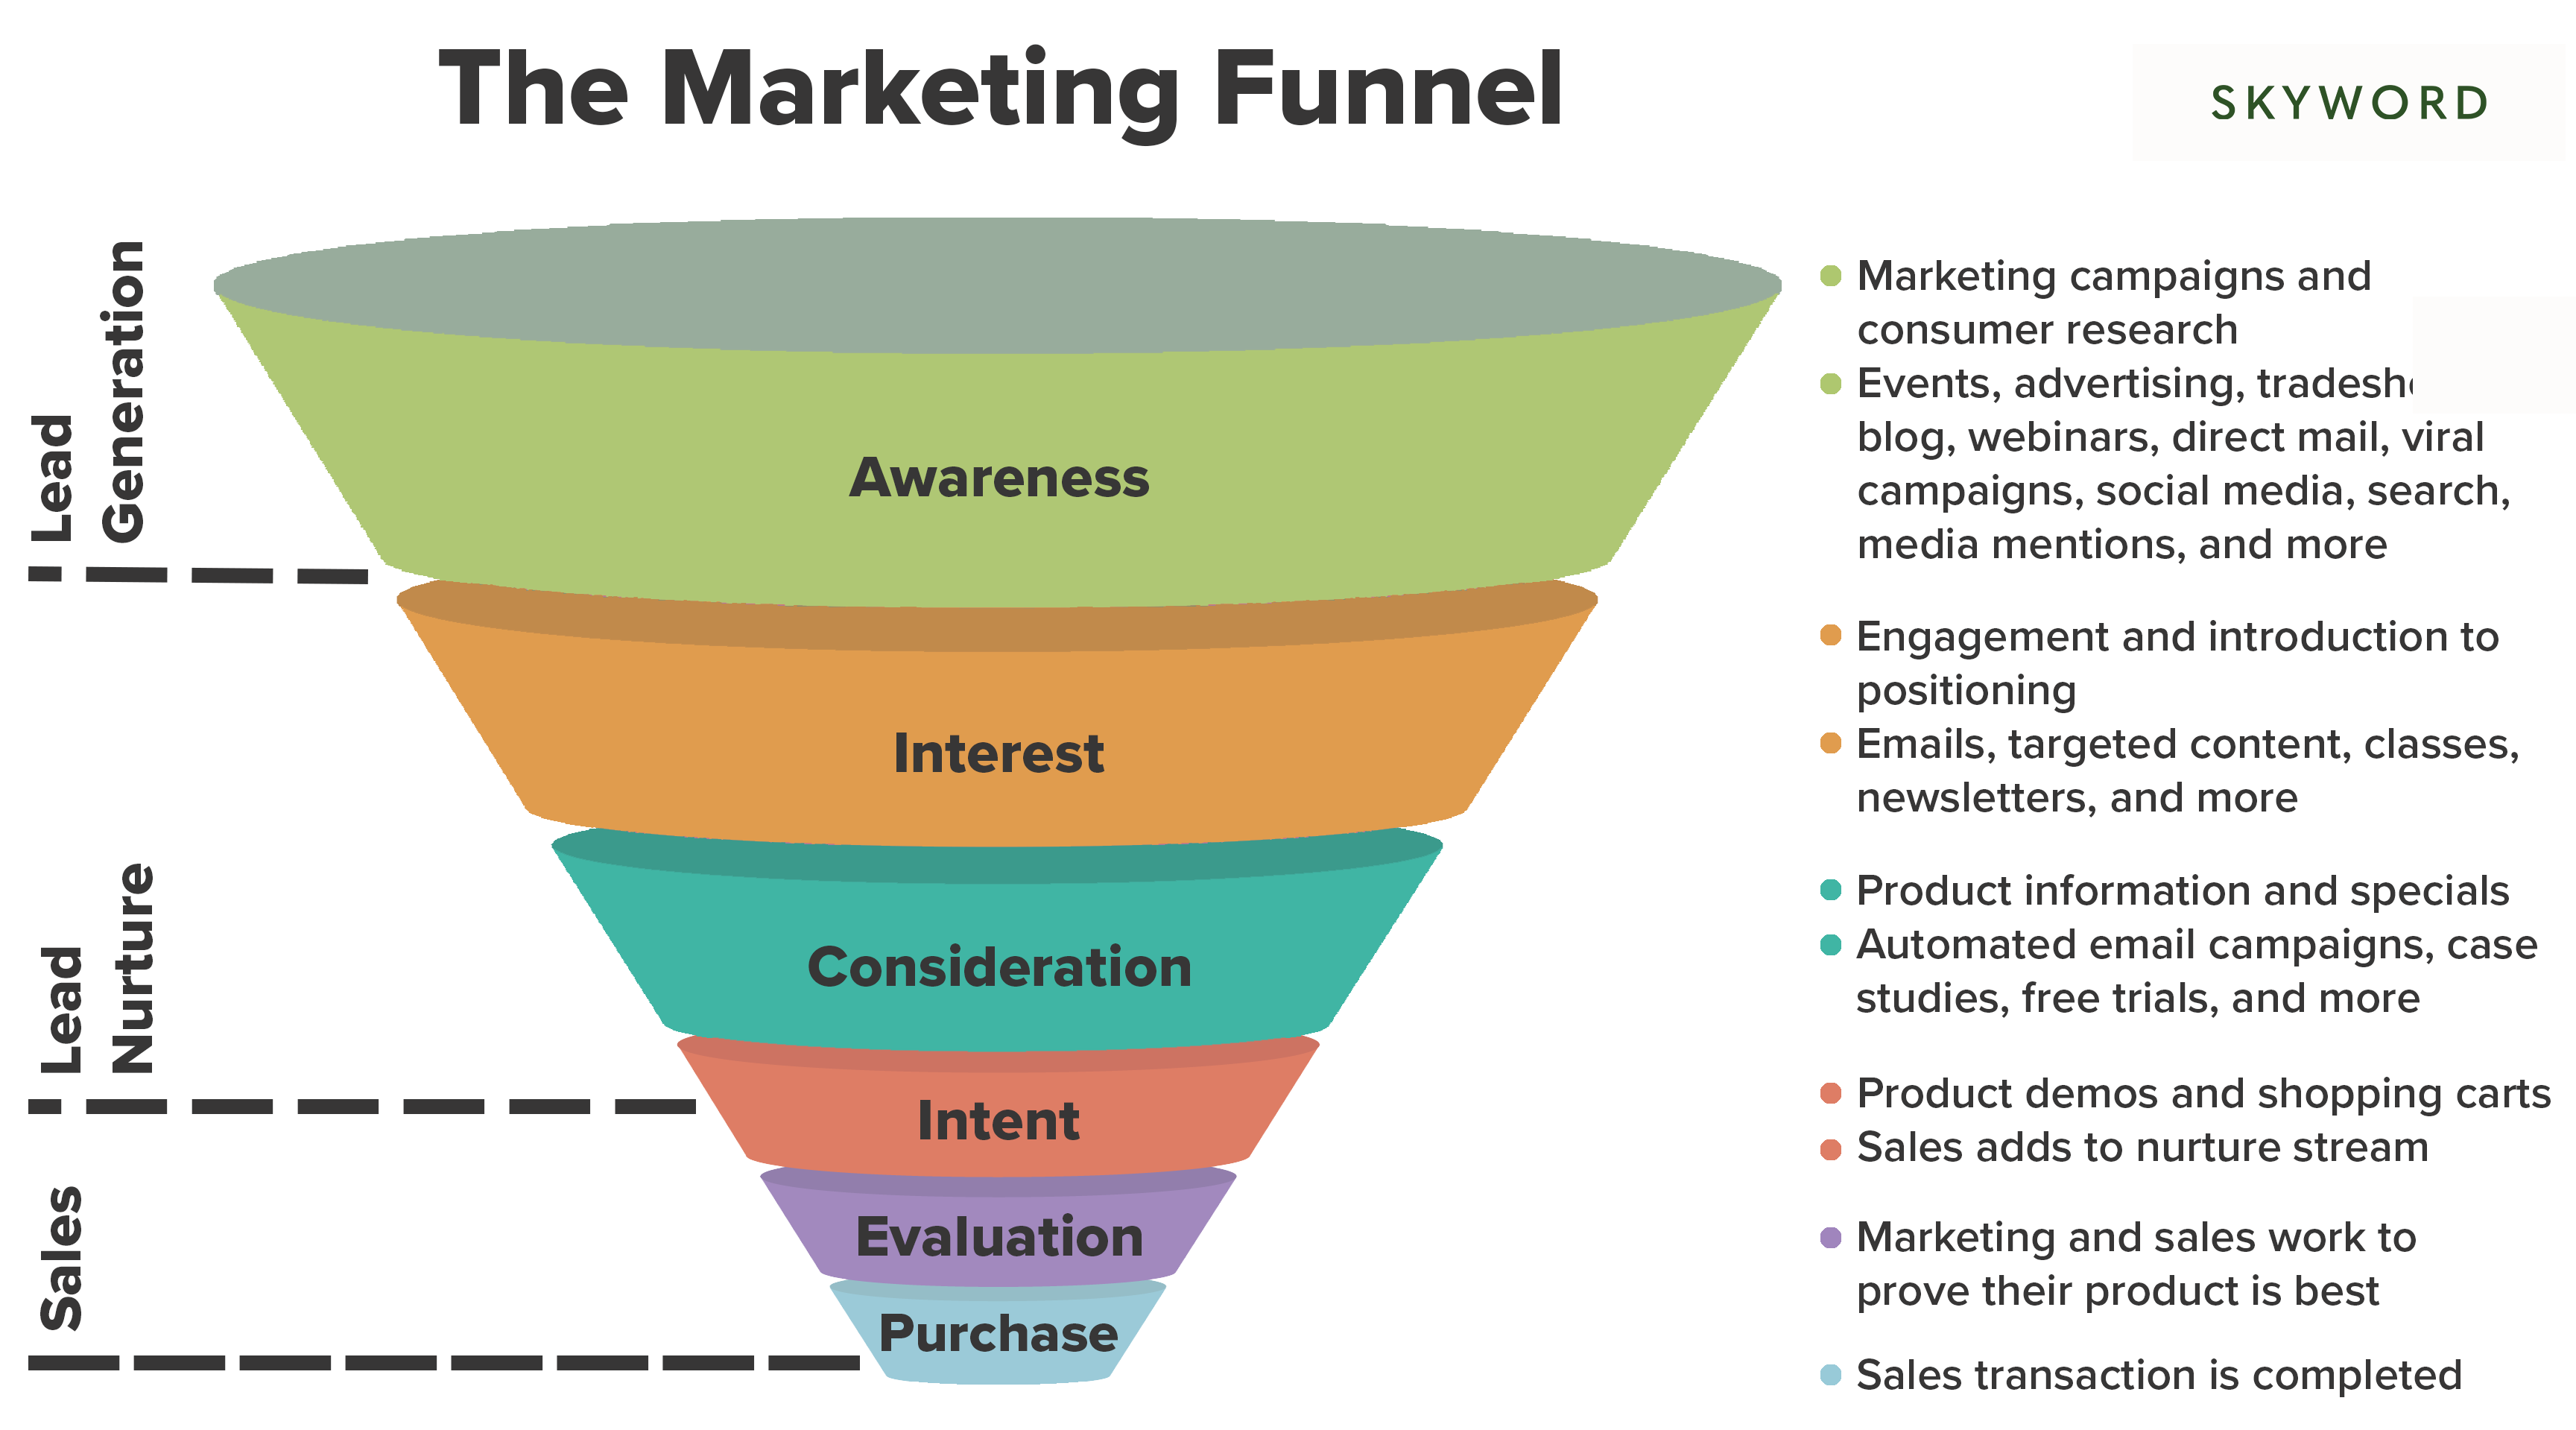 The Marketing Funnel infographics by Skyword, also known as Sales Funnel